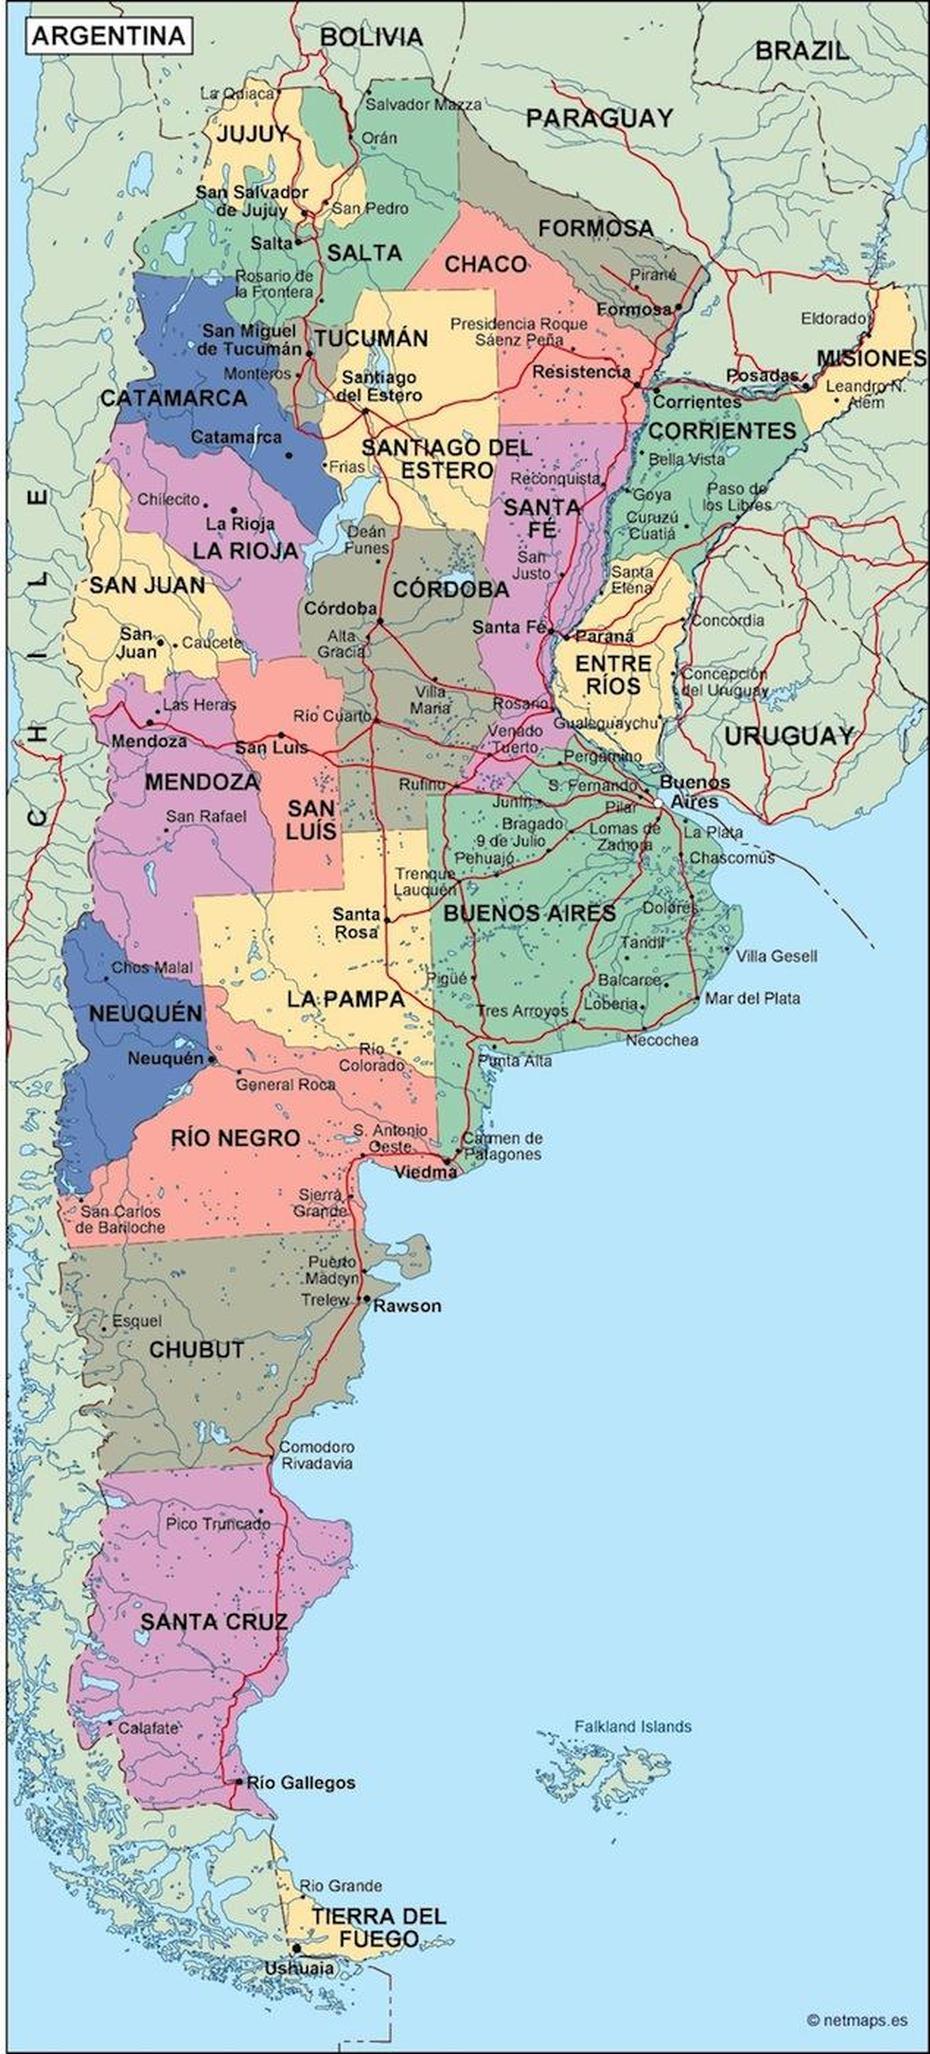 Argentina Political Map. Eps Illustrator Map | Vector World Maps, Pichanal, Argentina, Capital Of Argentina, Southern Argentina